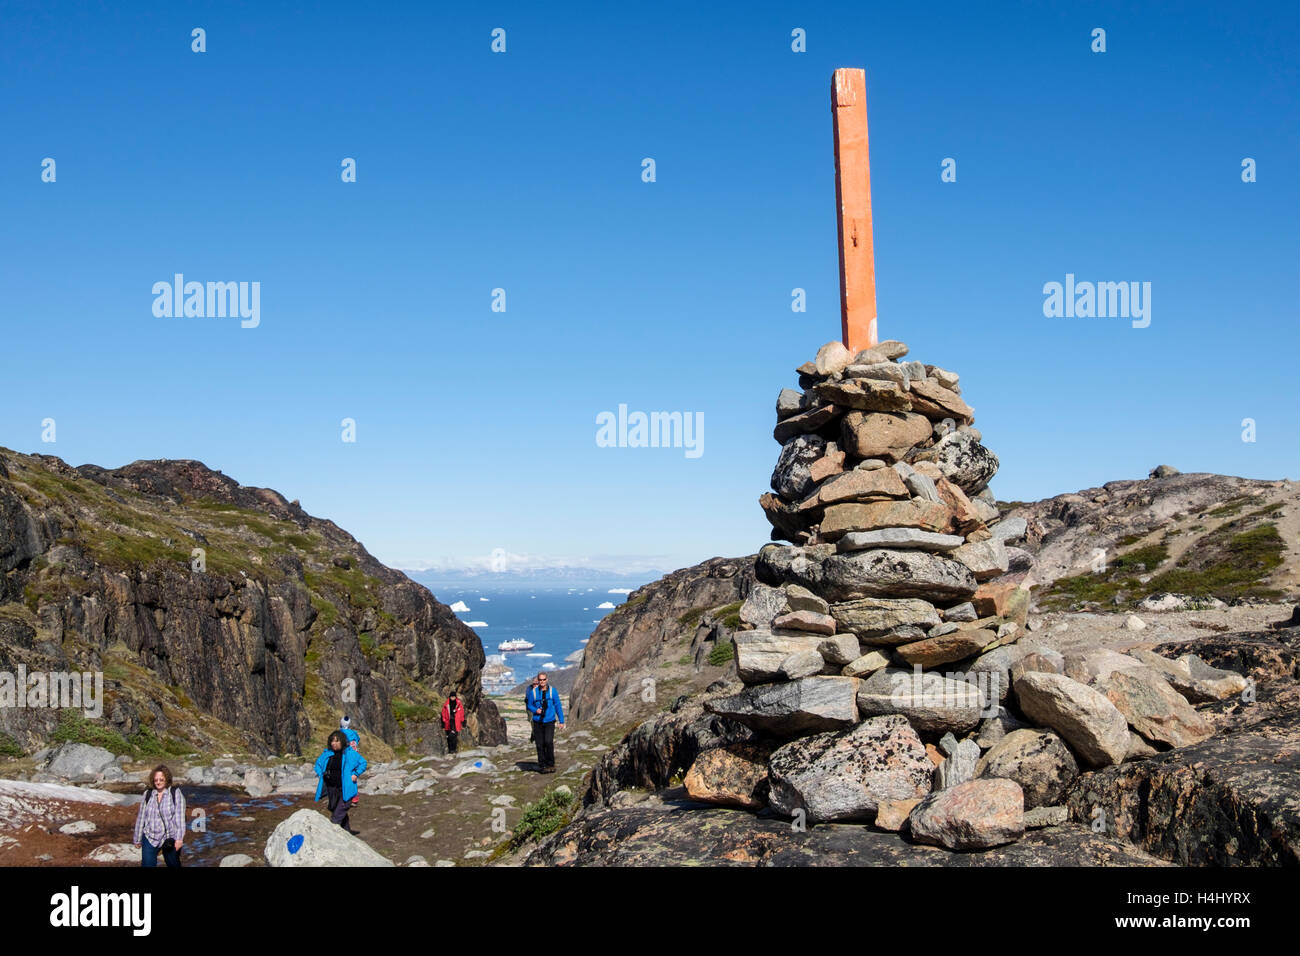 Cairn marking high point on blue route trail with people hiking to Jakobshavn Iceford and Holms Bakke in summer 2016. Ilulissat, Greenland Stock Photo